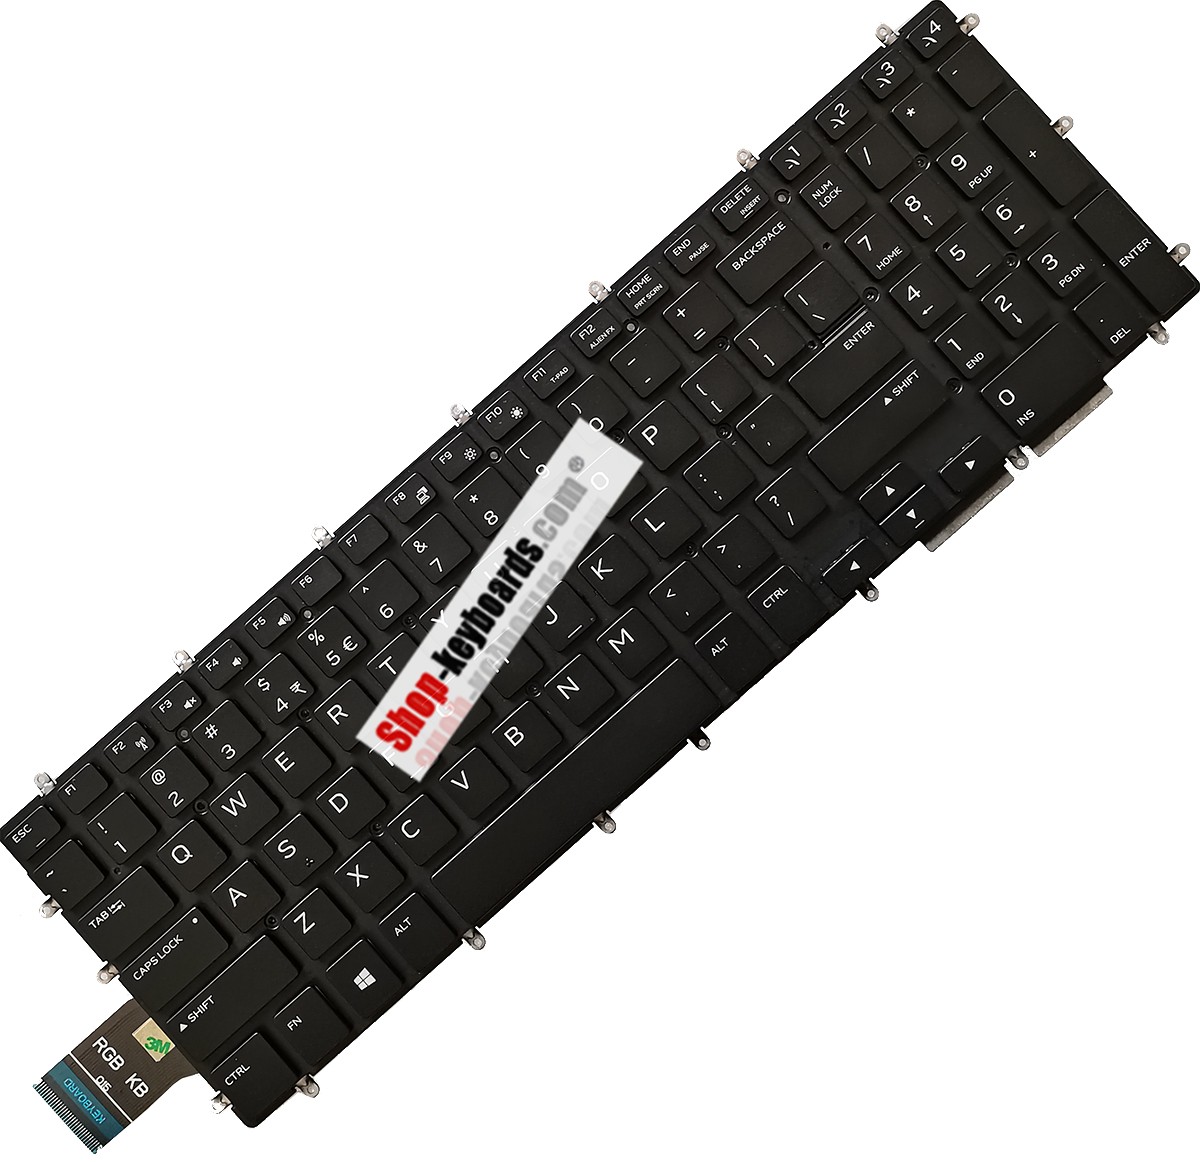 Dell ALW15M-D2758R Keyboard replacement